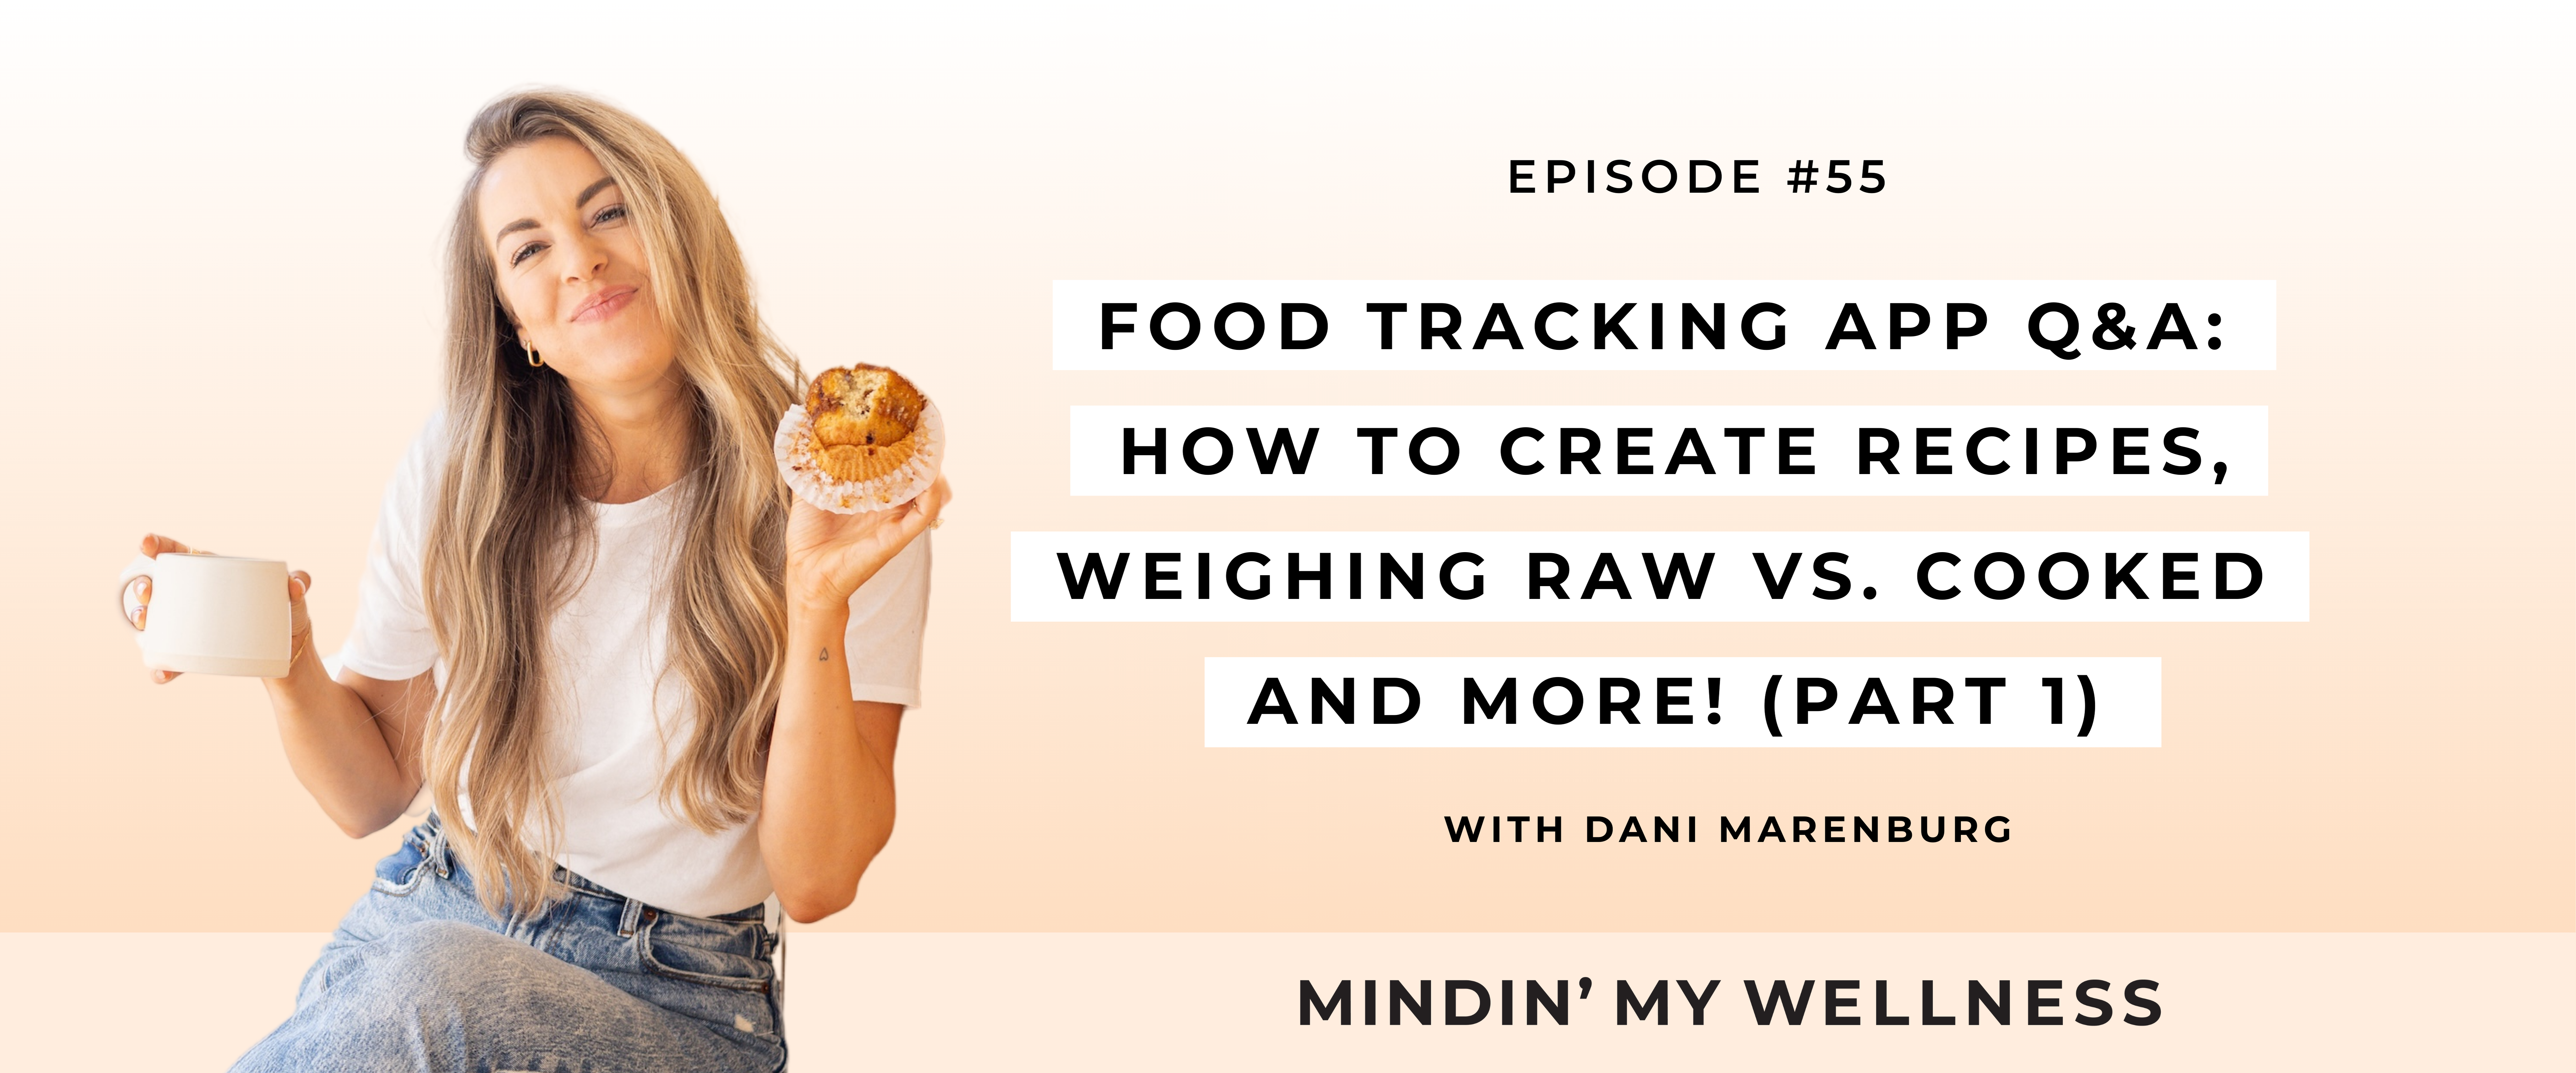 Food Tracking App Q&A: How to Create Recipes, Weighing Raw vs. Cooked and More! (Part 1)